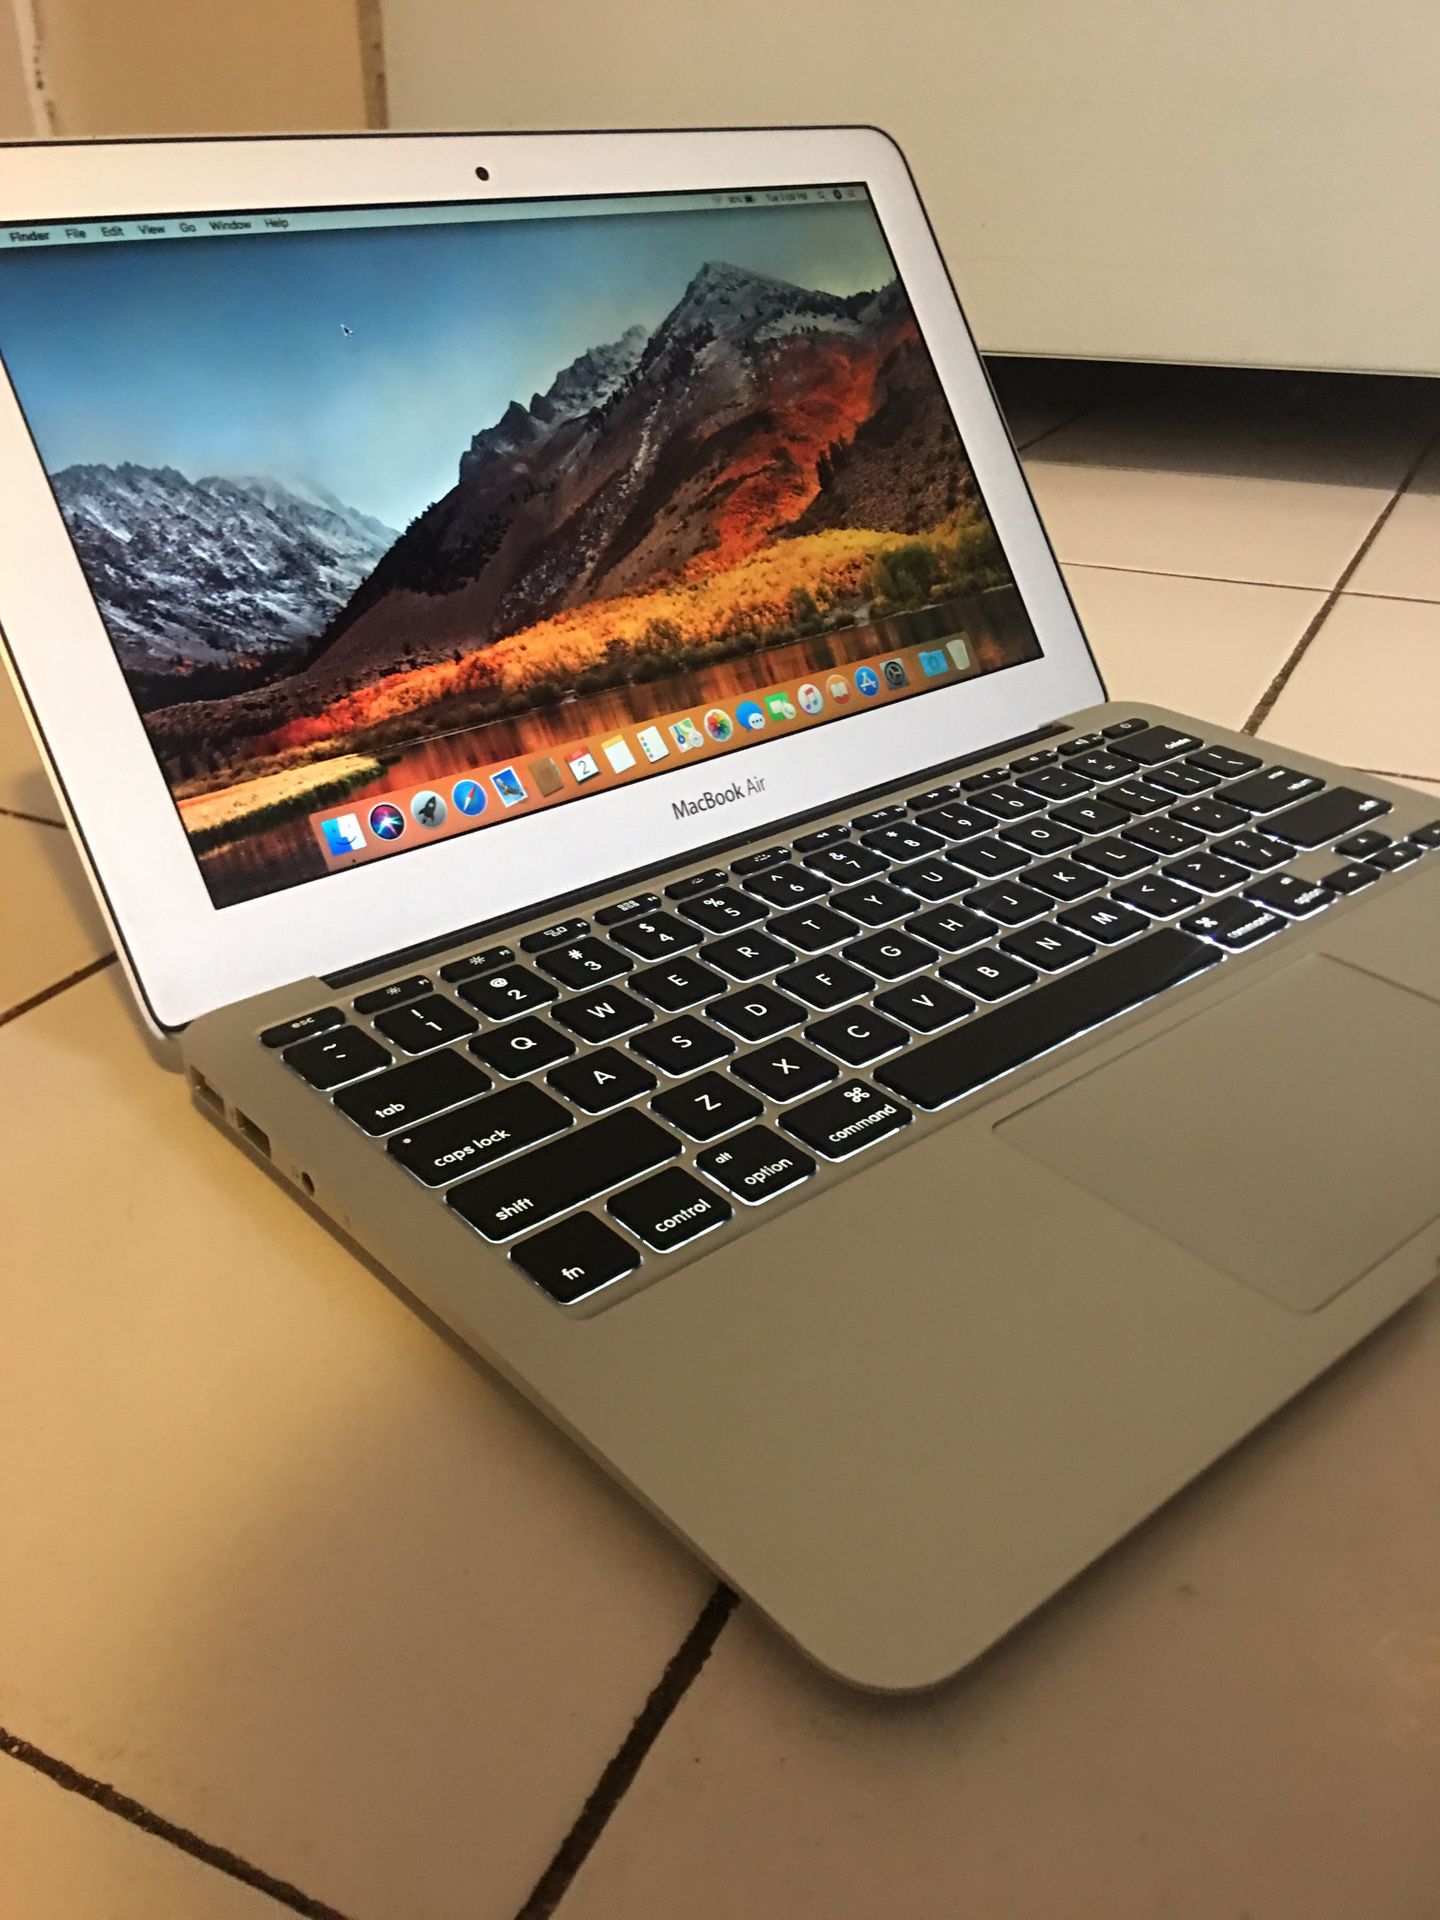 Apple Macbook Air 11.6"/webcam/Bluetooth IOS Mojave As NEW core i5 128GB SSD, 4GB RAM charger 379$ Firm price